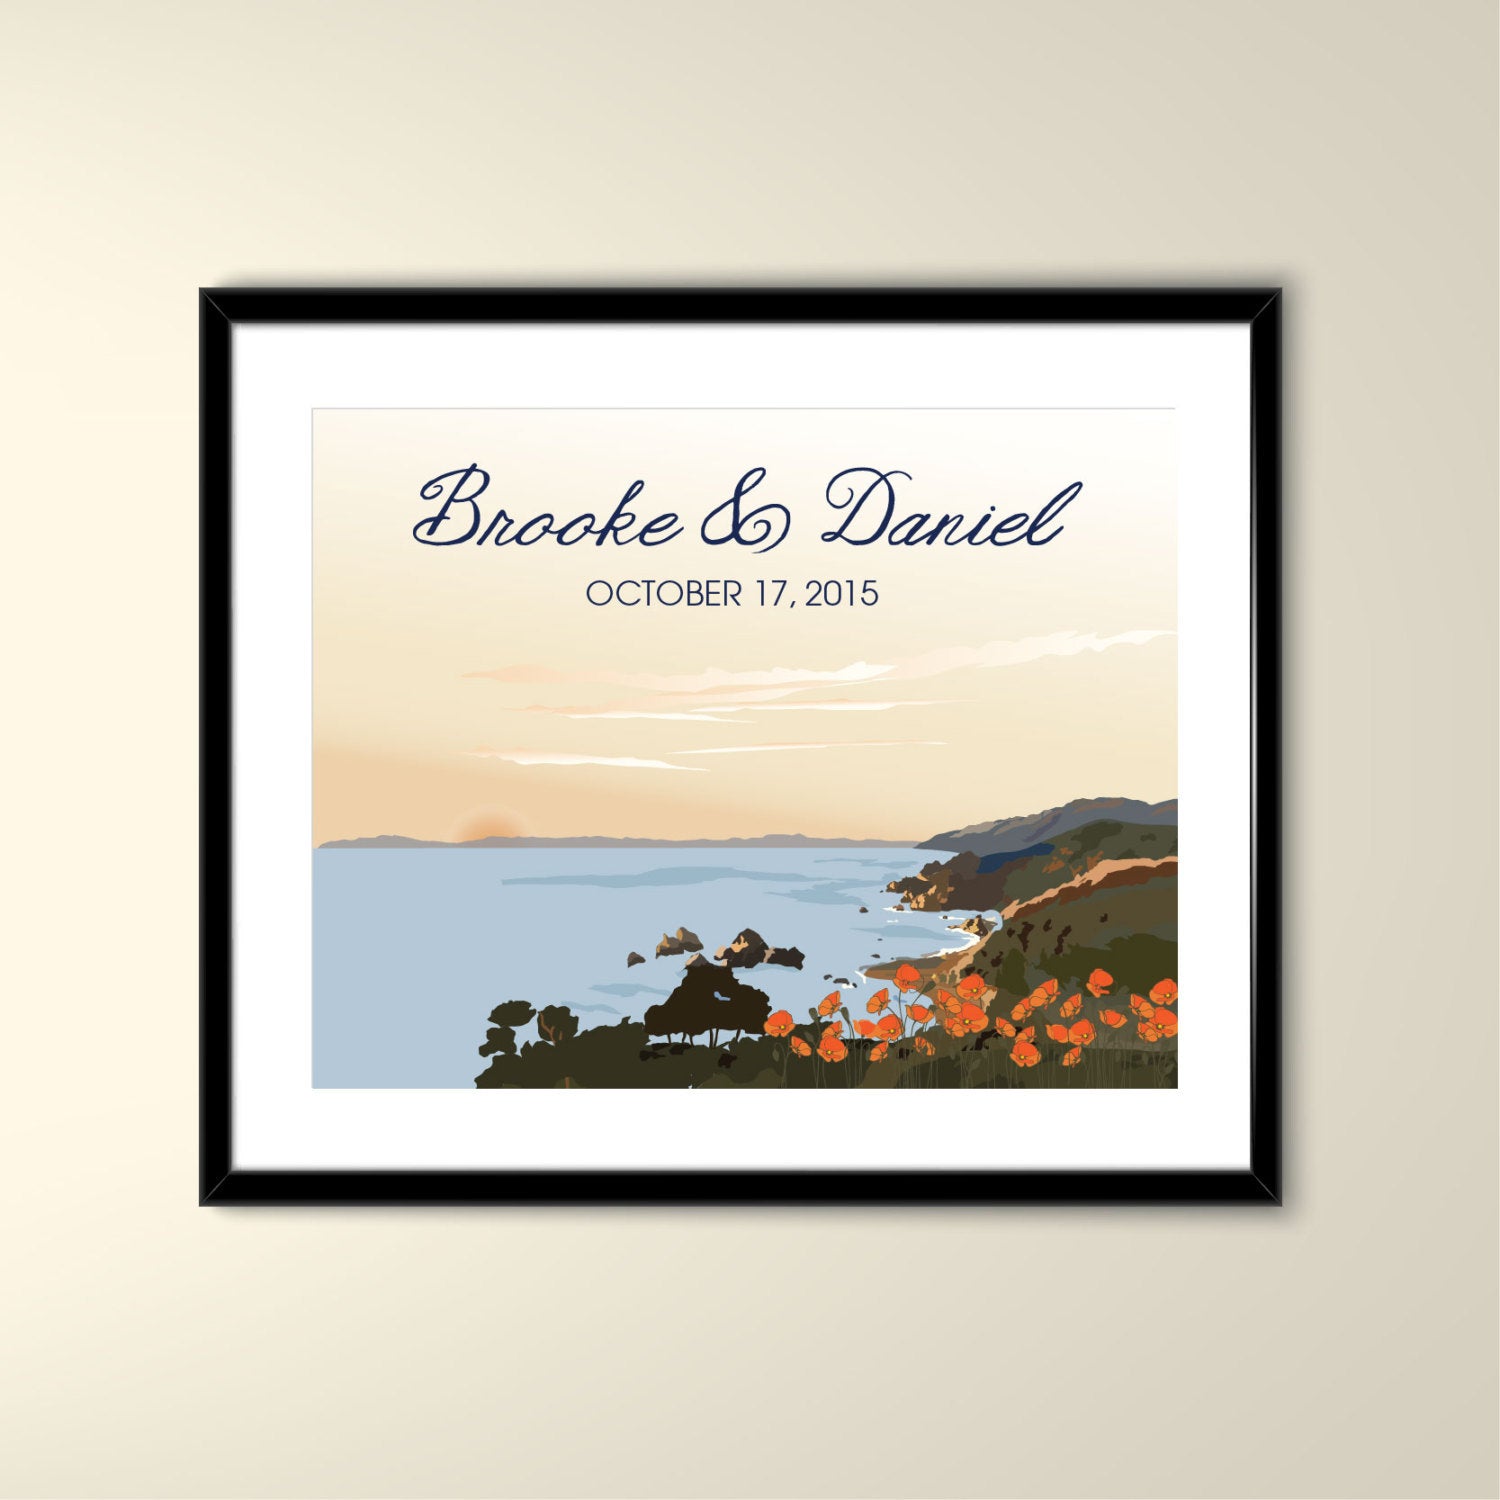 California Coast Pelican Point with Poppies 11x14 Vintage Poster-Wedding Poster personalized with Names and date (frame not included)